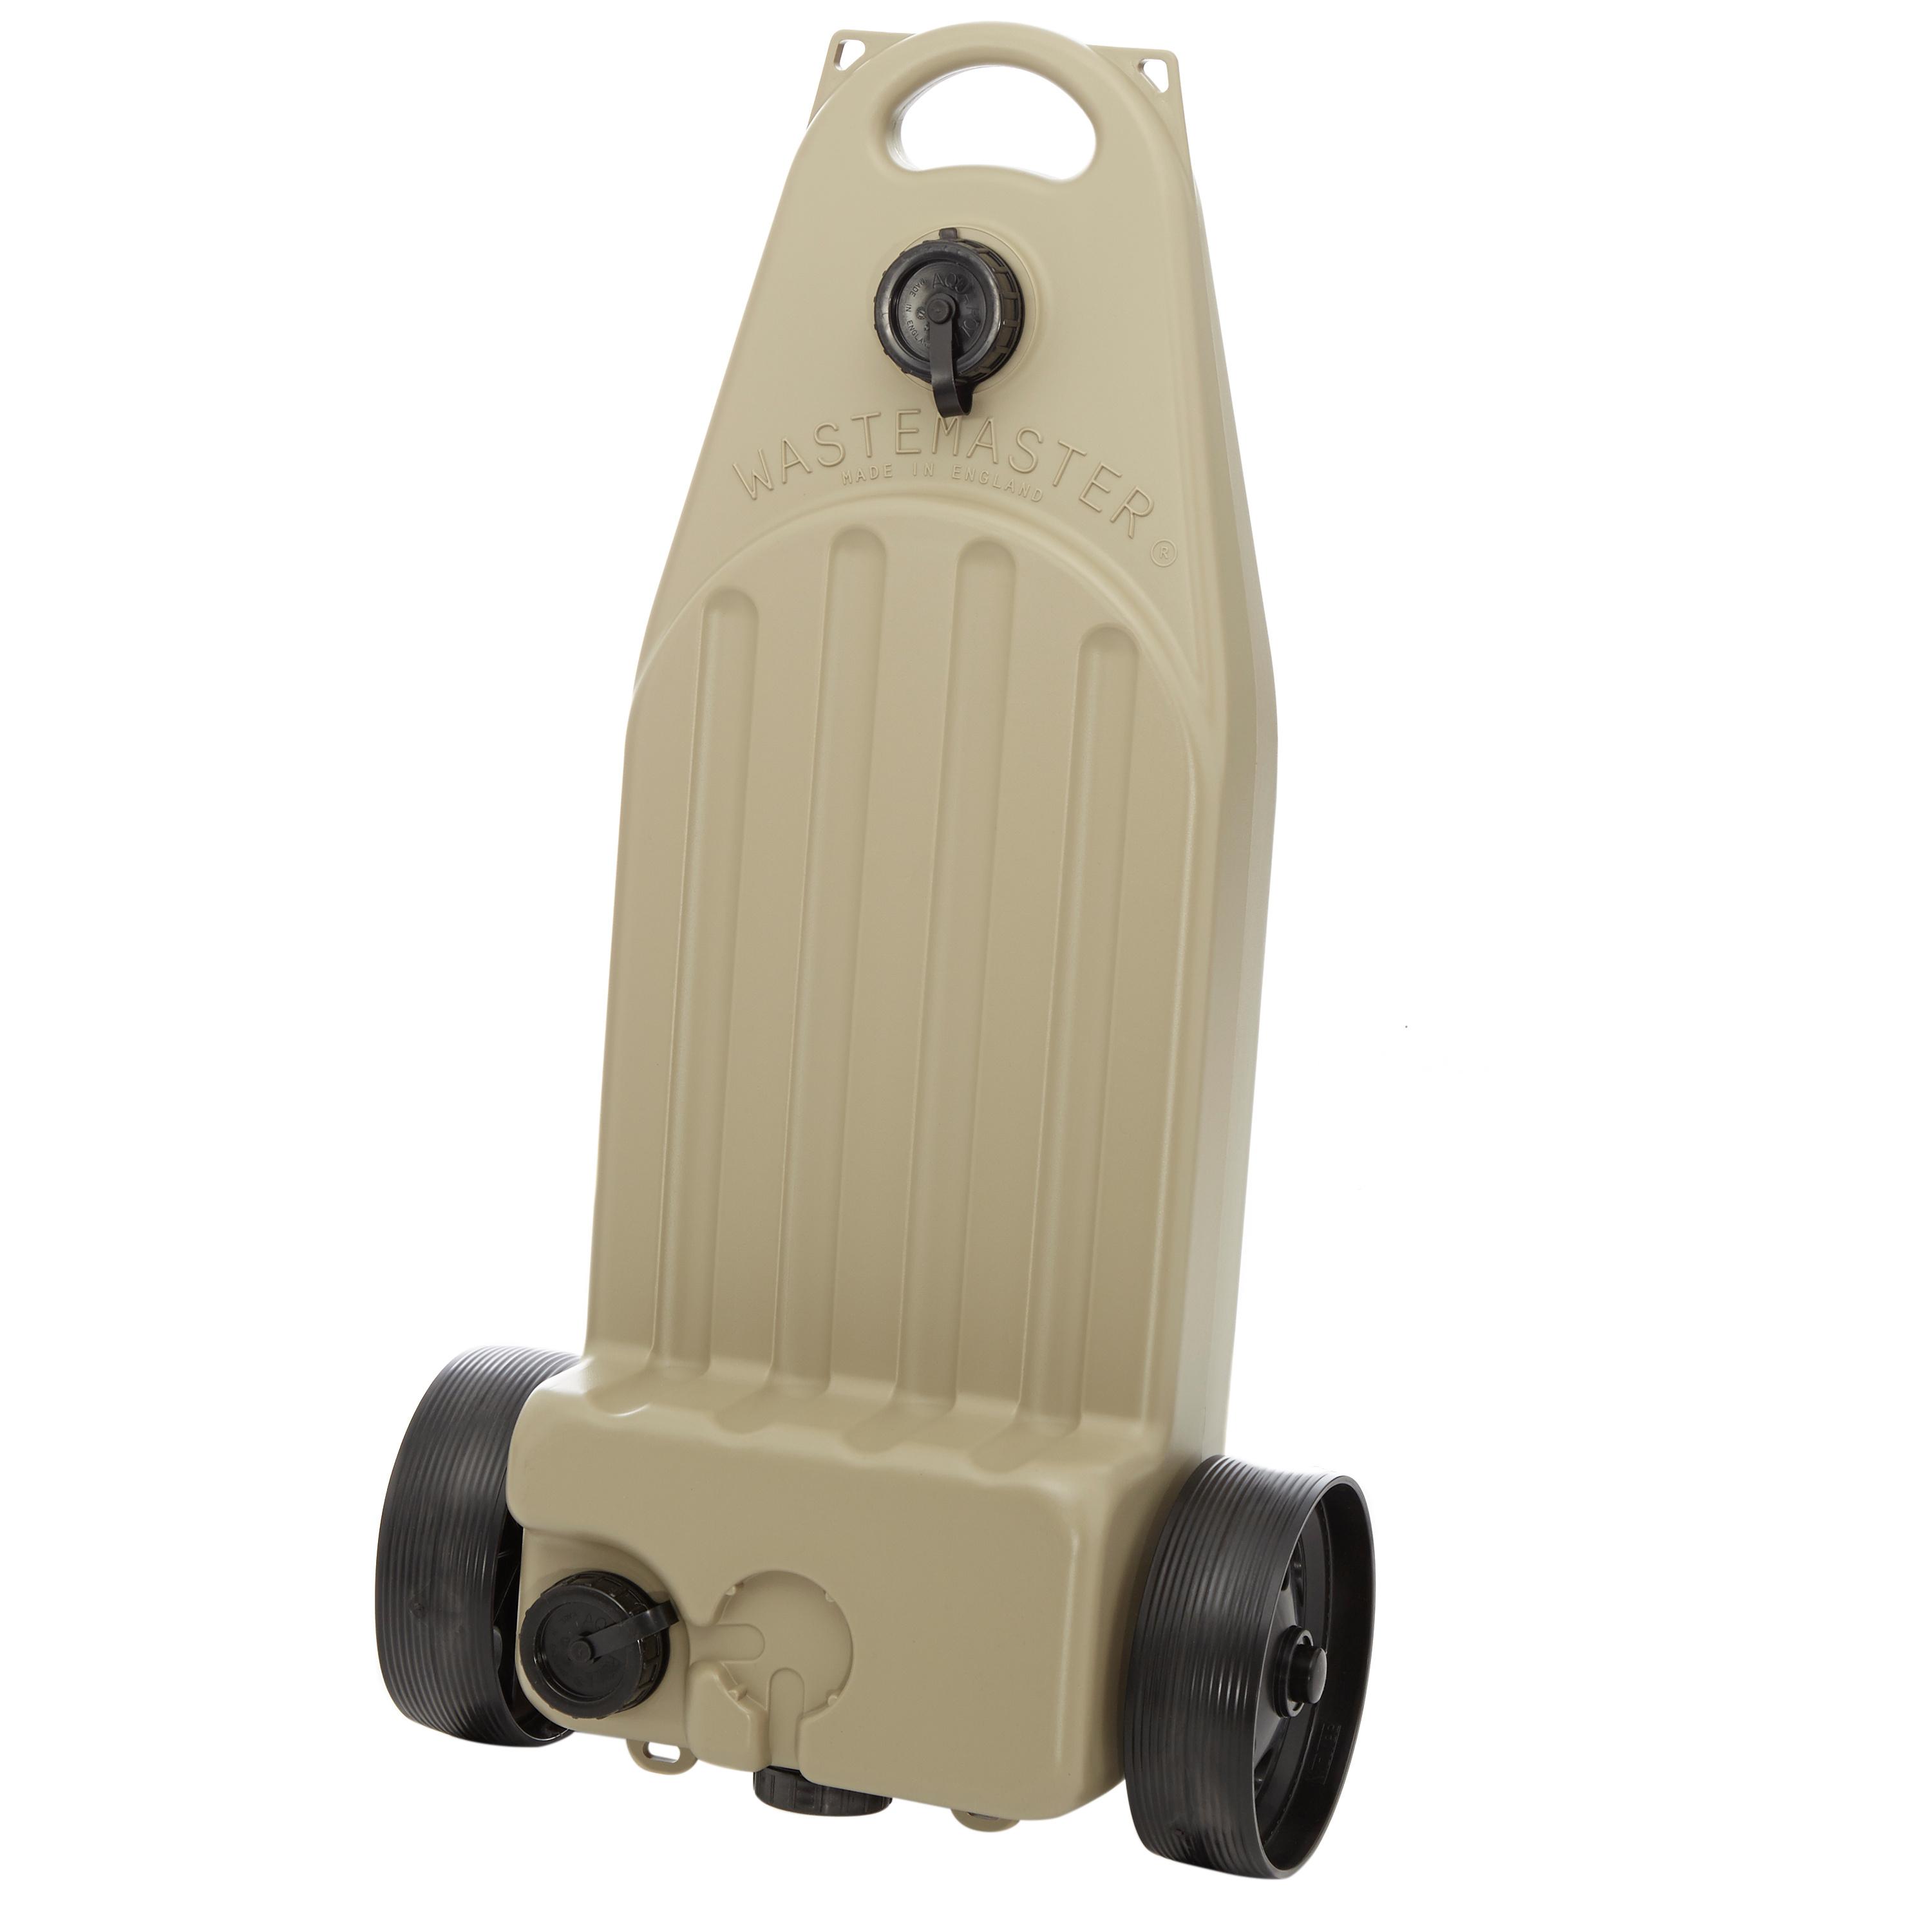 Hitchman Hitchman Wastemaster Waste Water Carrier - Multi, Multi